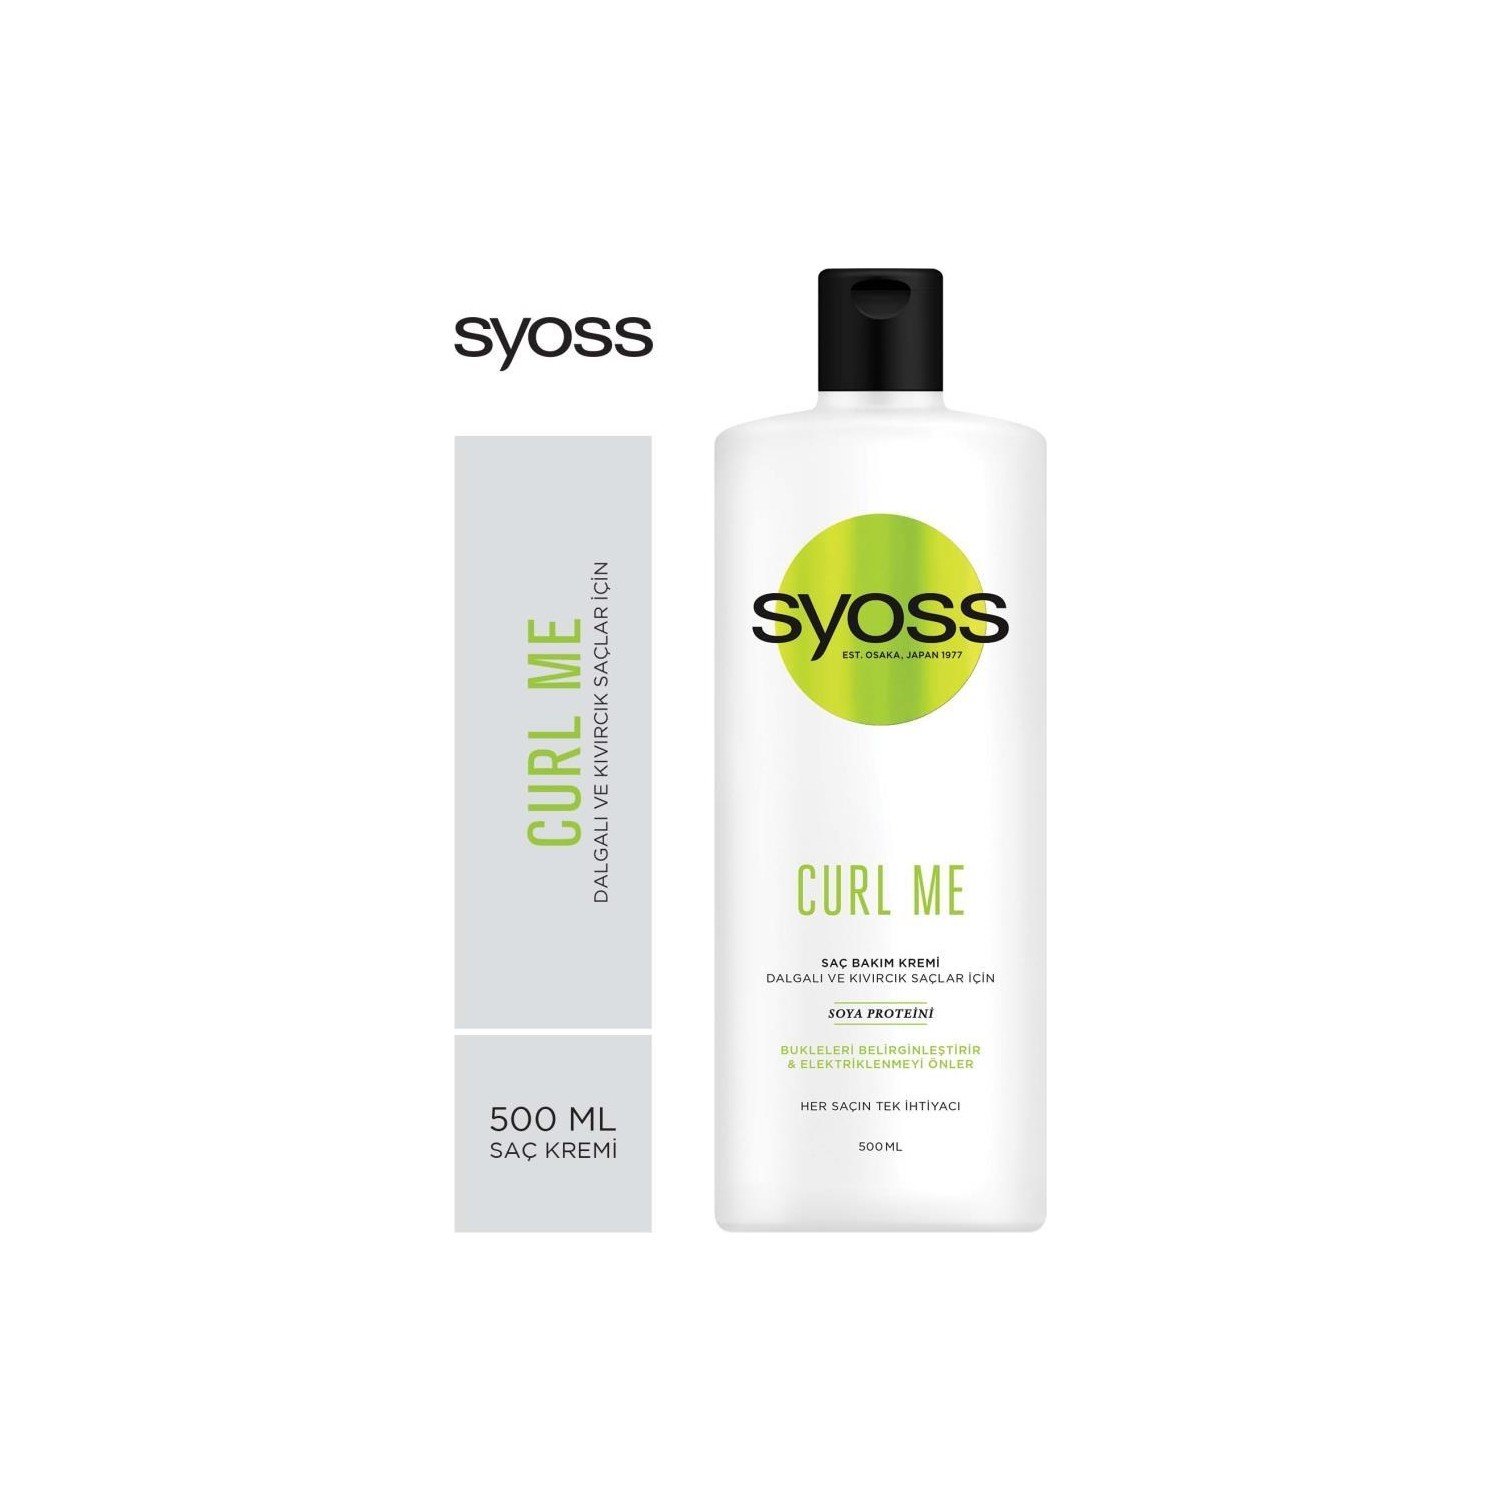 Syoss Curl me. Syoss sampon Curl me 500ml /6. Шампунь Syoss Curl me. Conditioner Wave. Curl me on